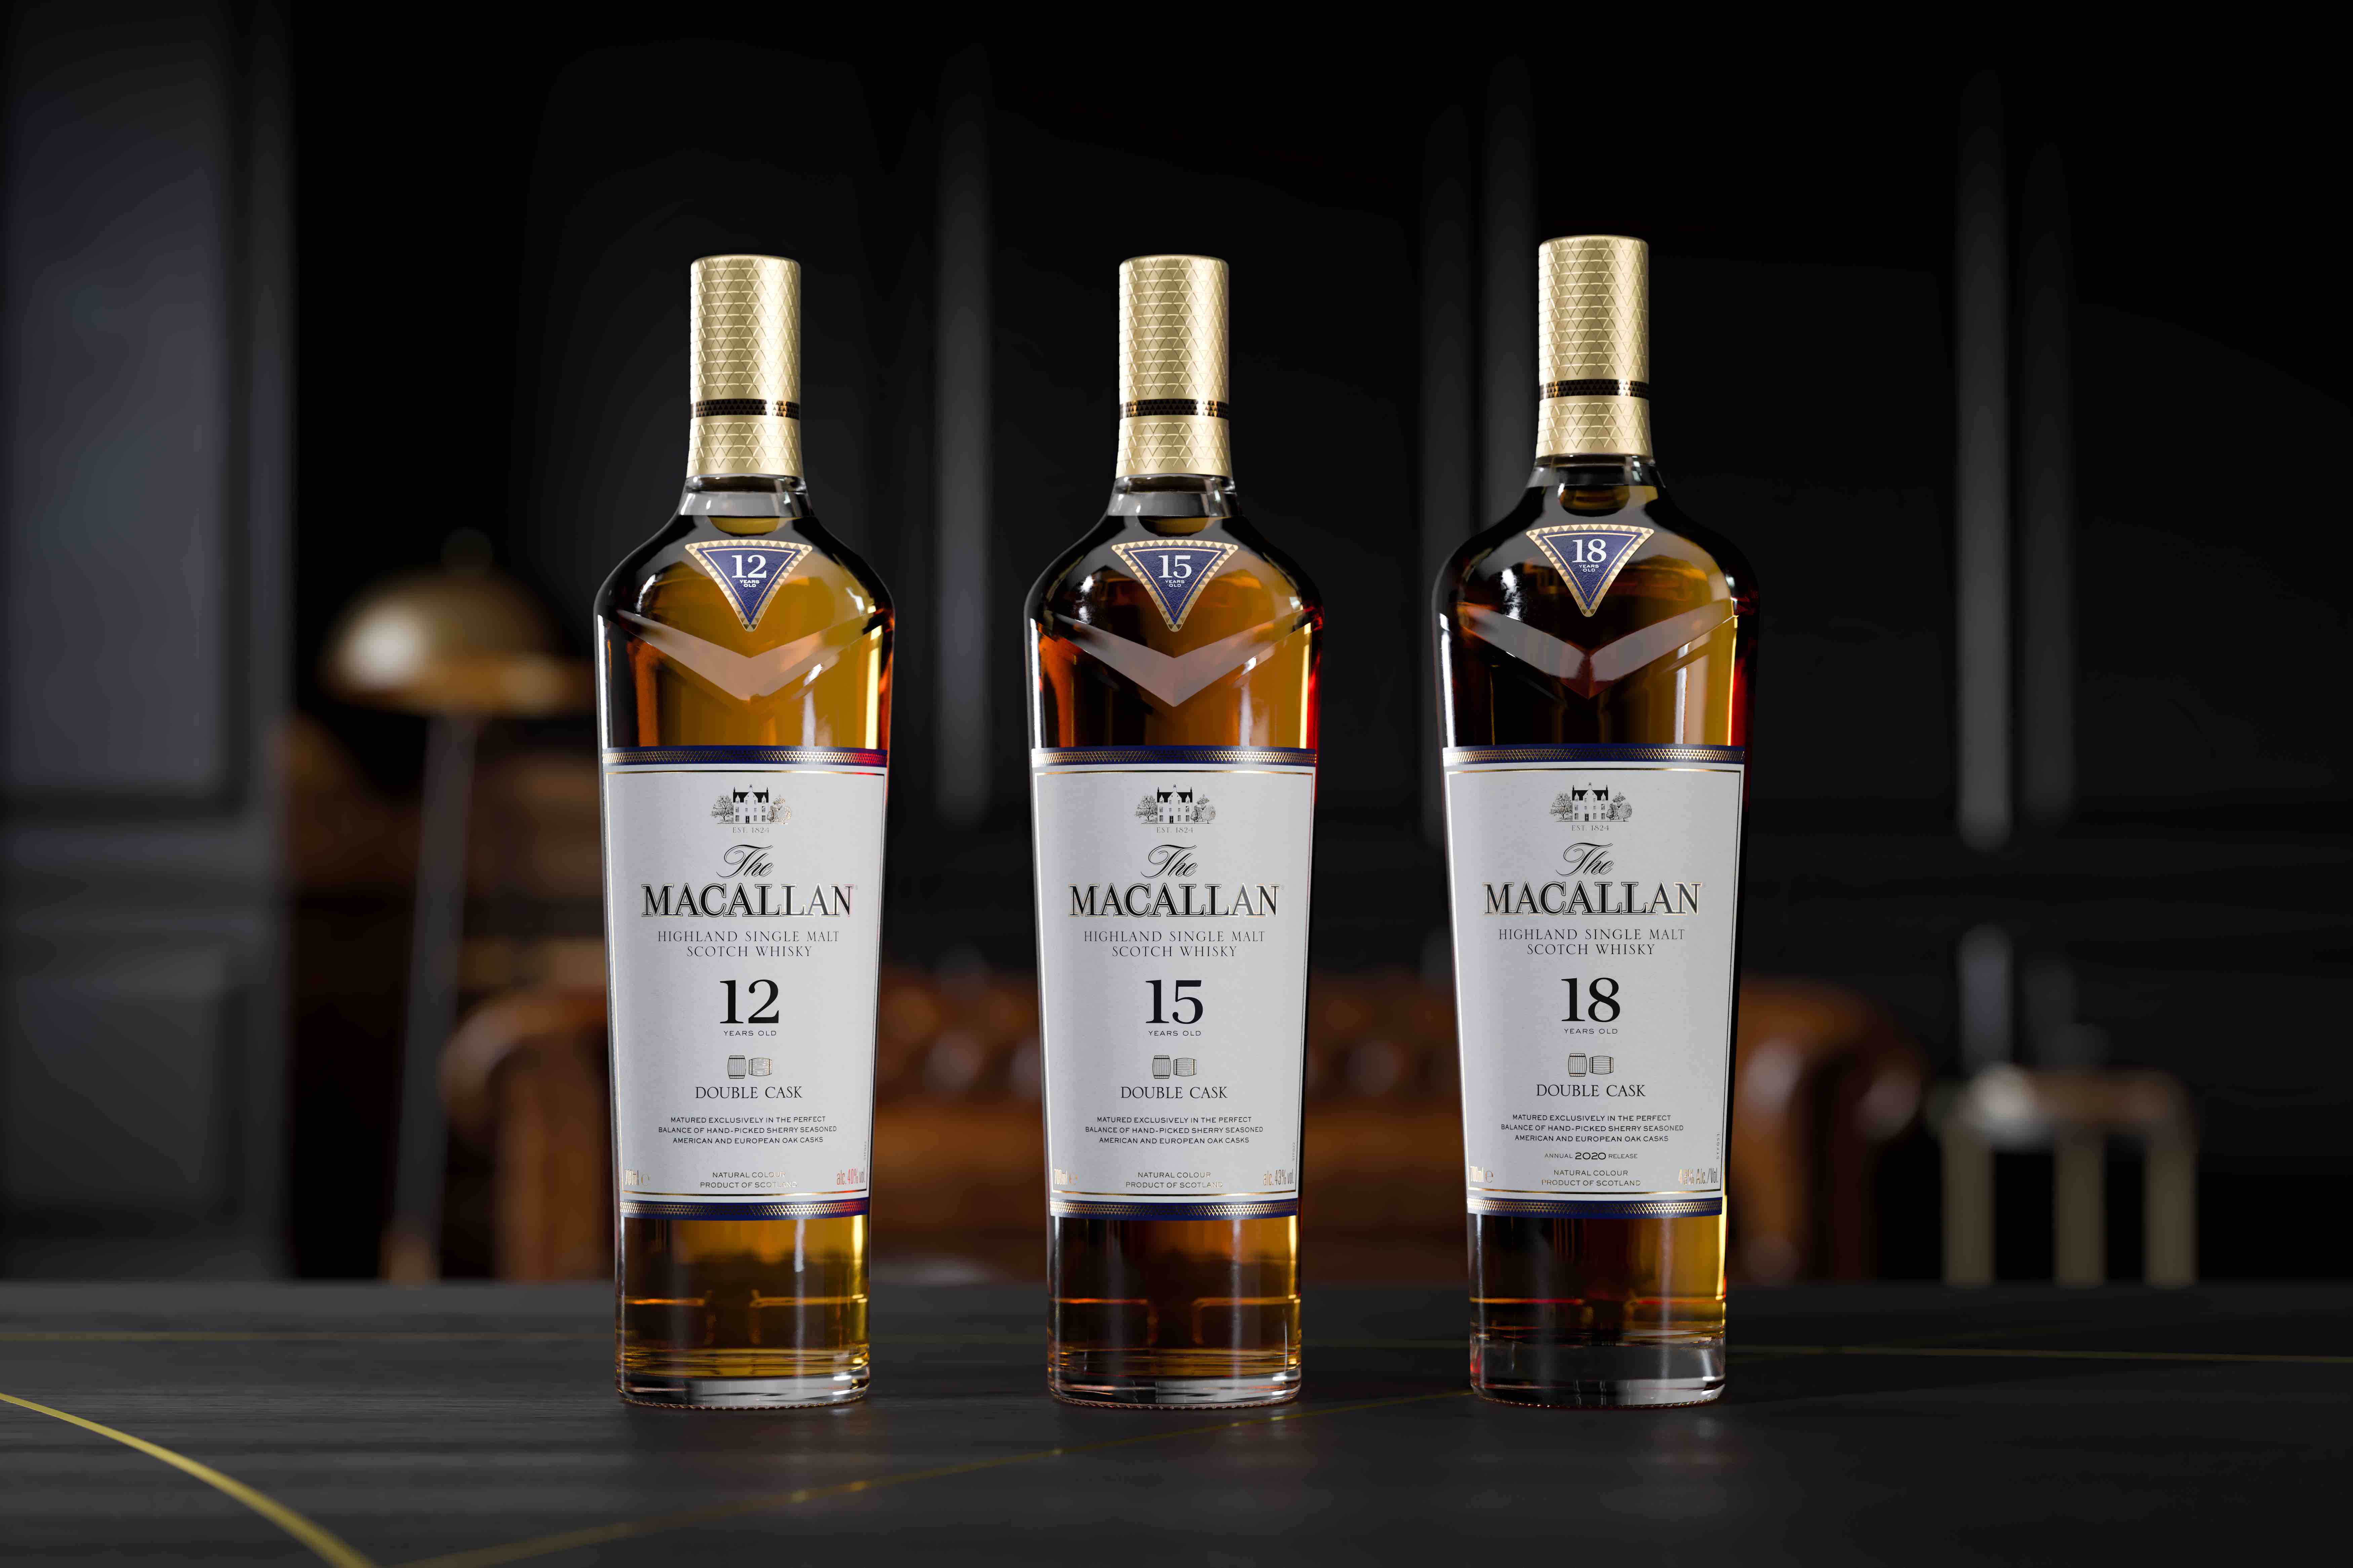 The Macallan Double Cask 15 years old & Double Cask 18 years old